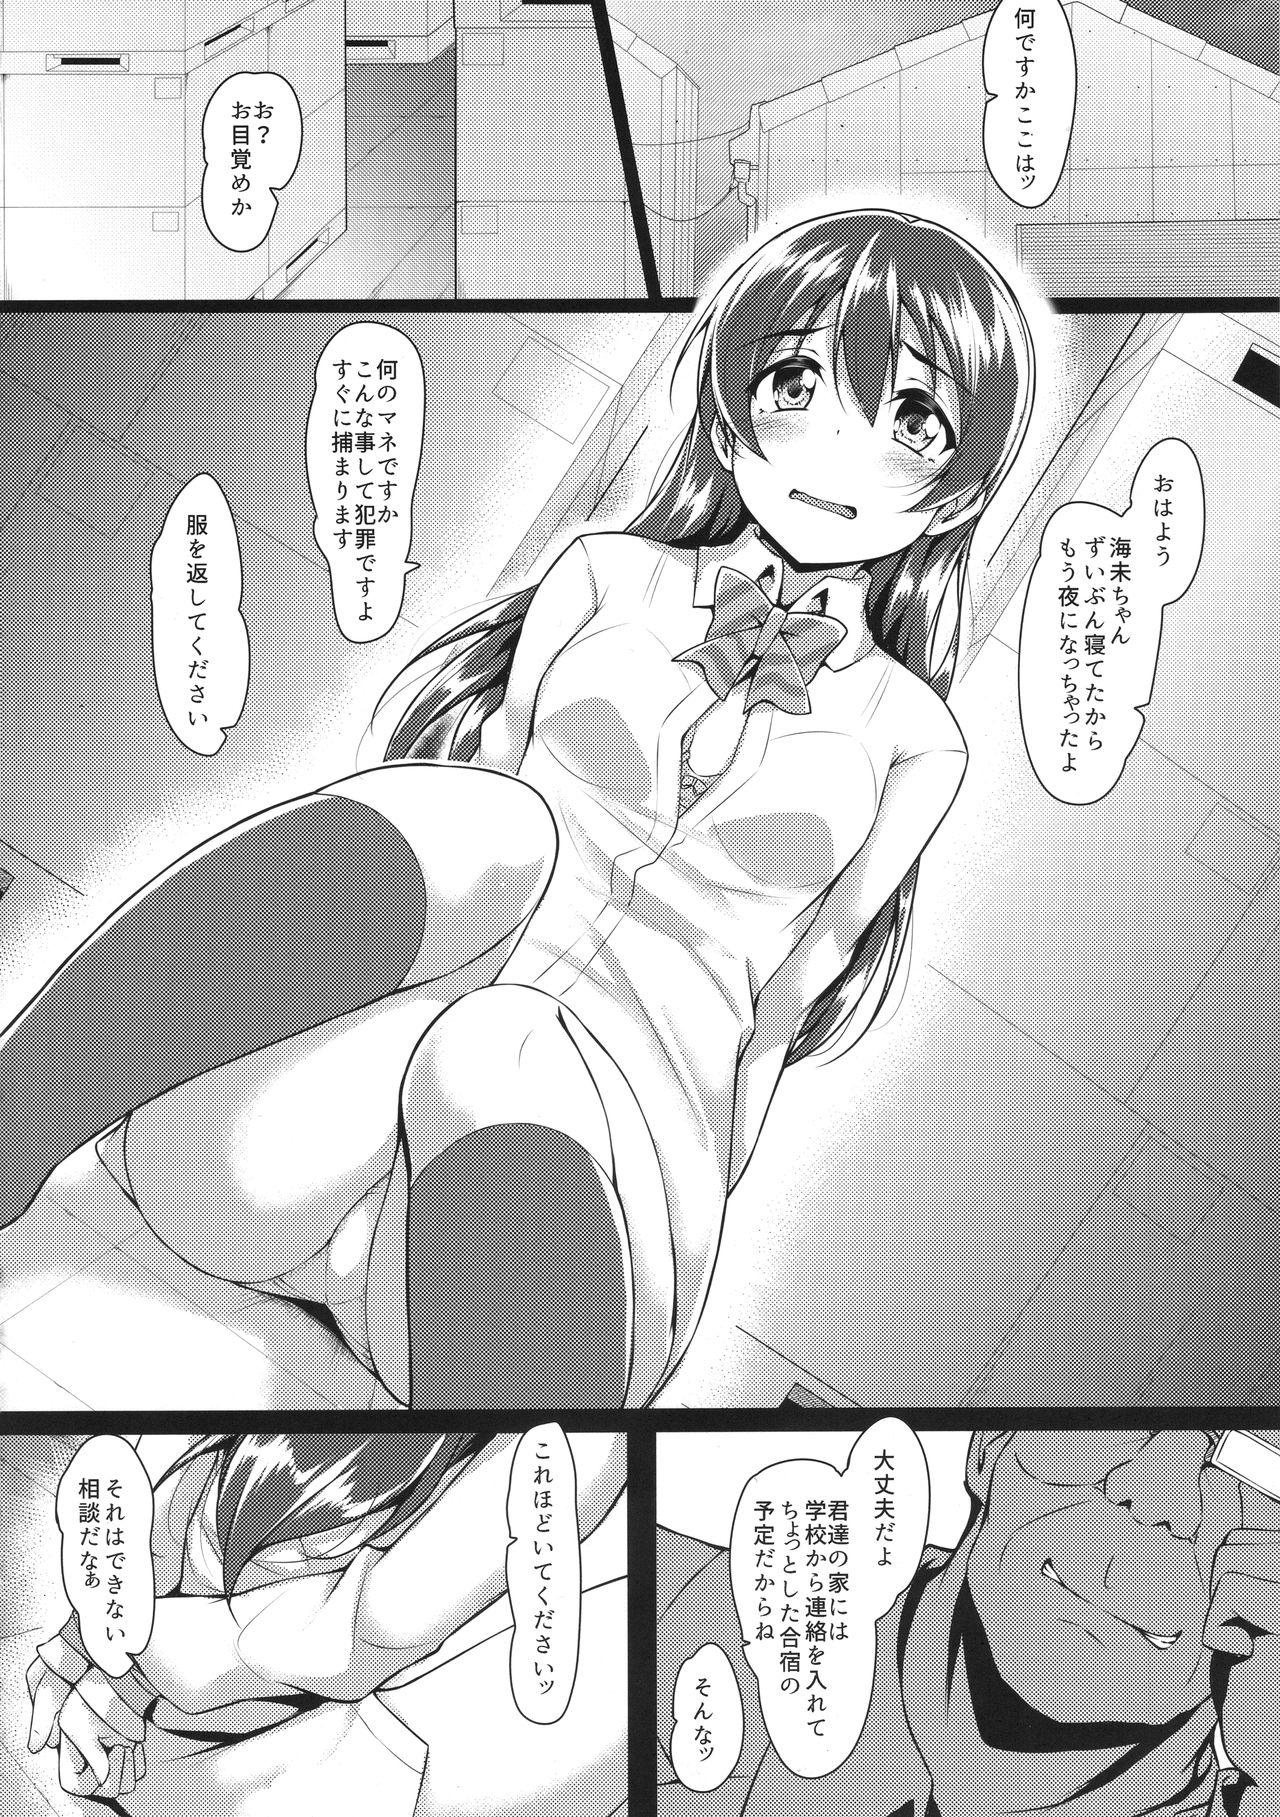 Teenager HONOUMIKAN - Love live Ametuer Porn - Page 9